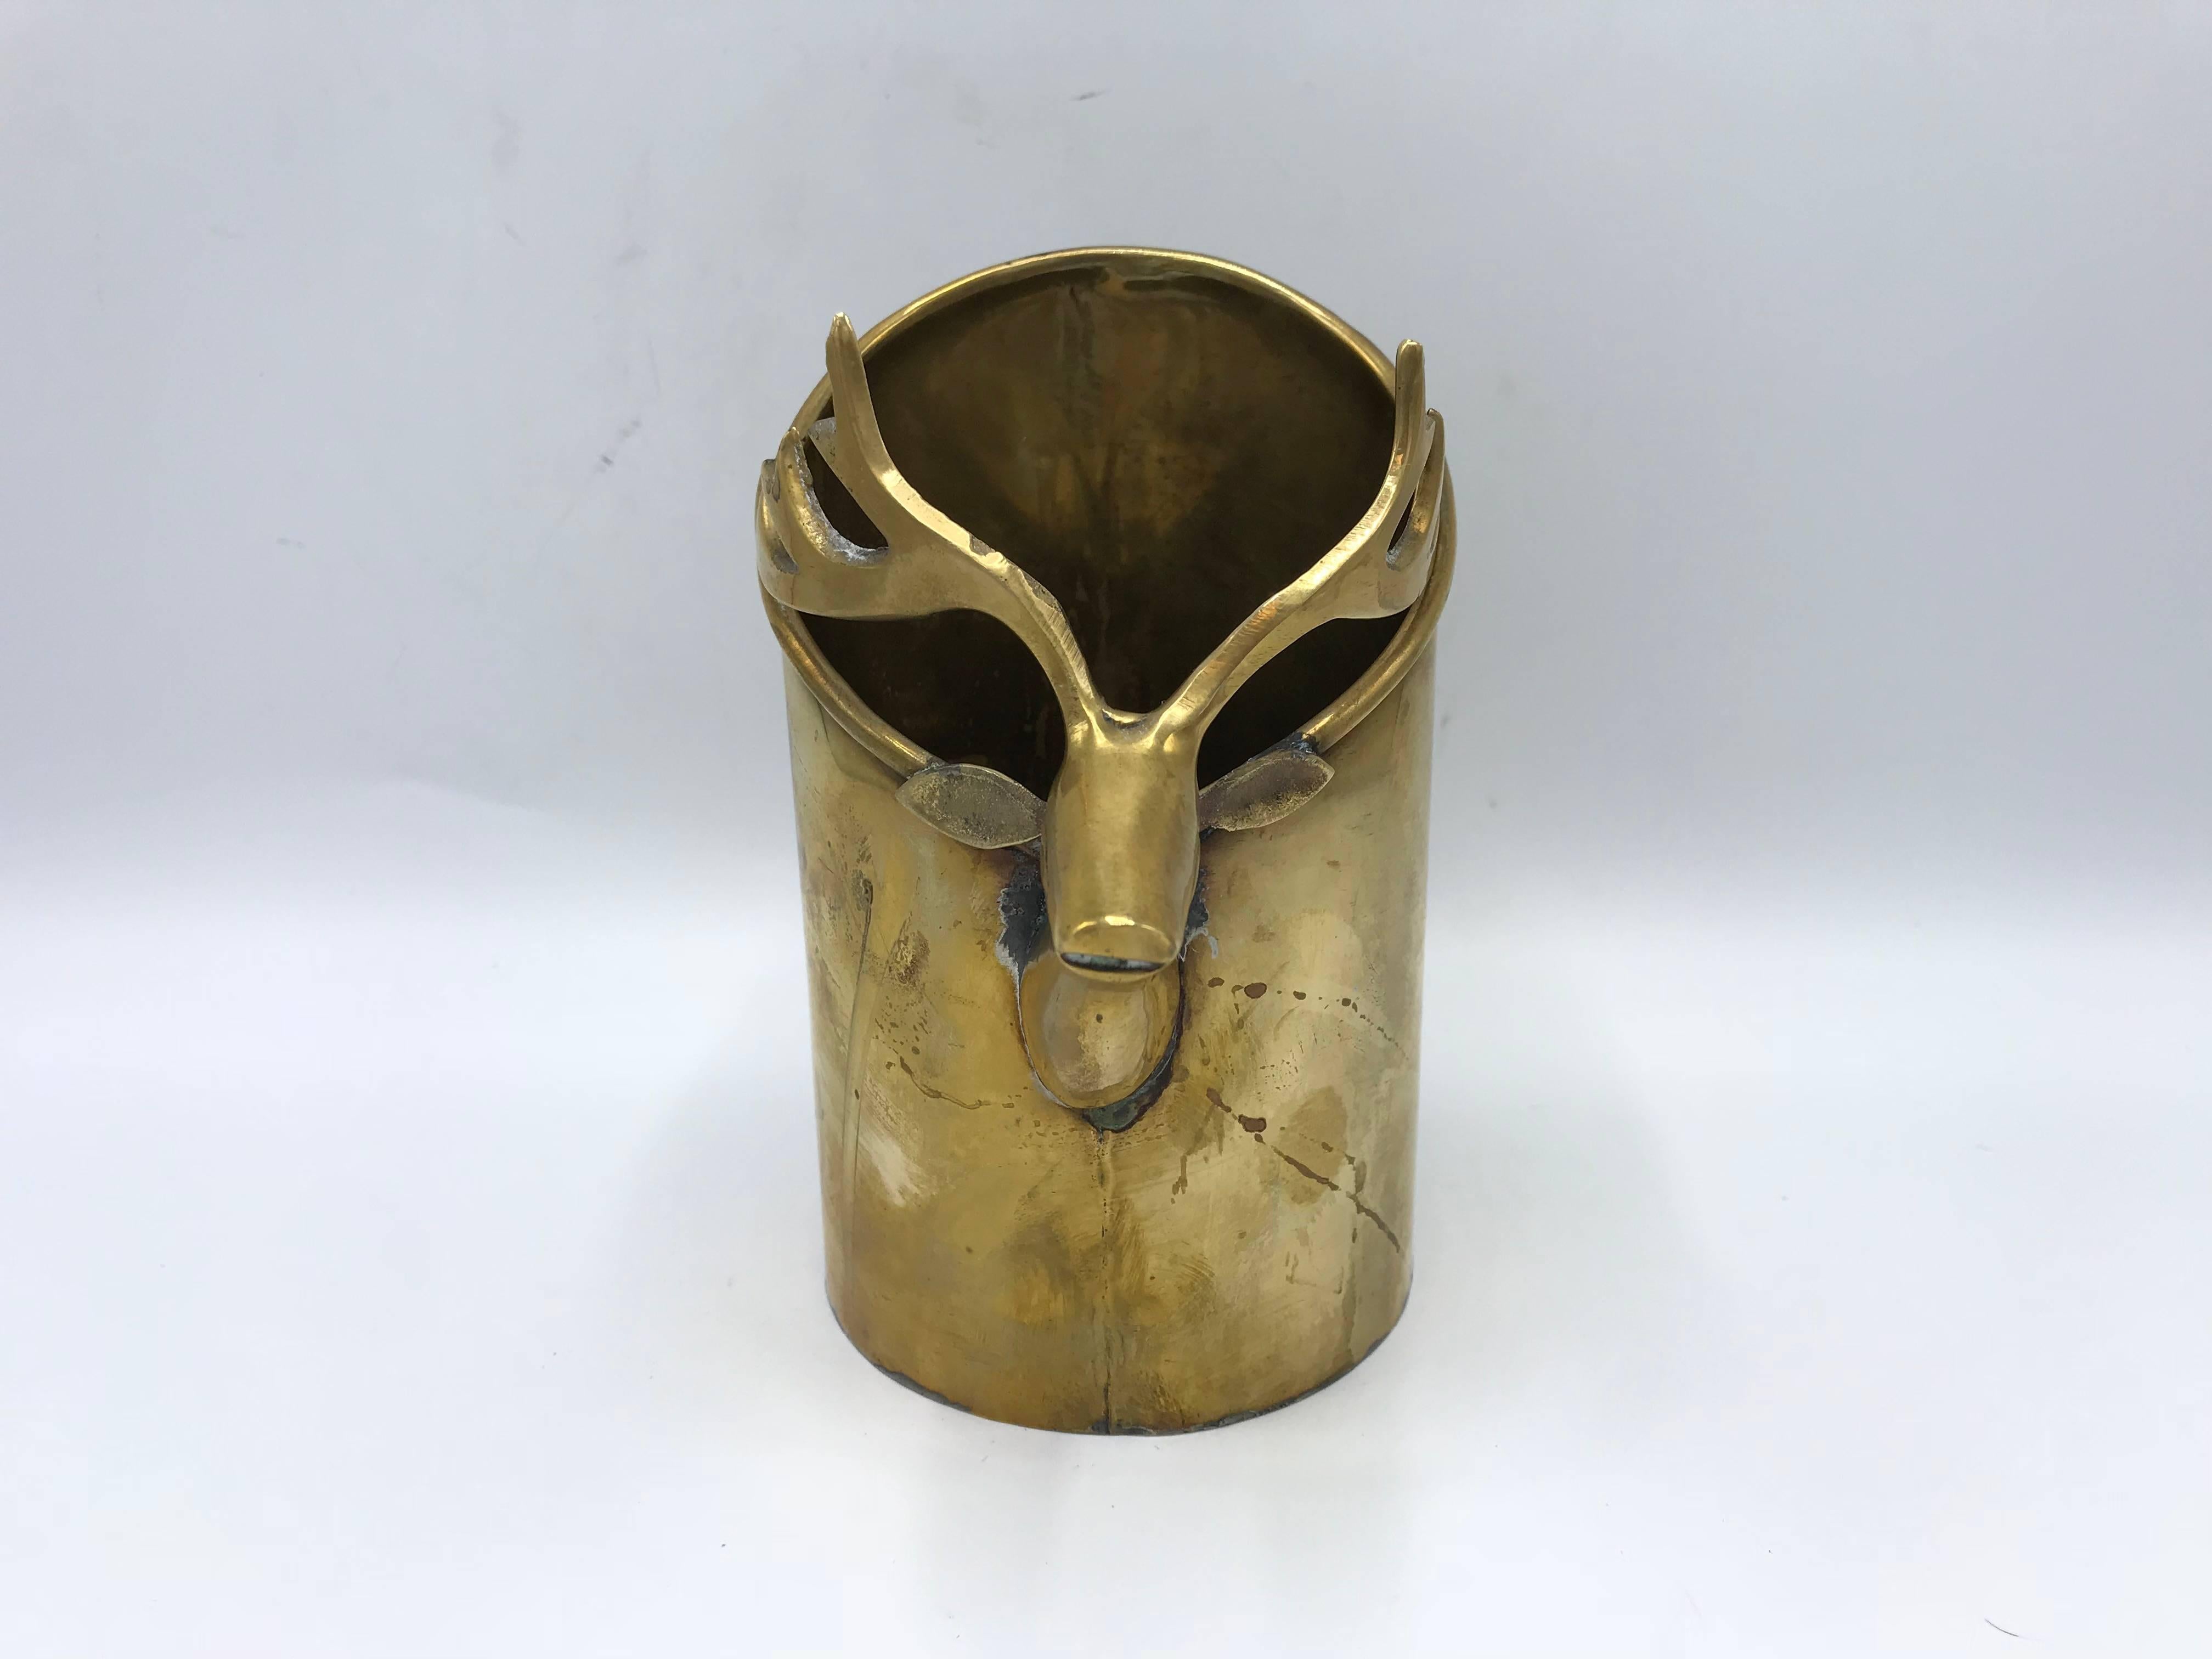 Offered is a fun and festive, 1970s brass wine chiller with a deer sculpture on the frontside. Perfect for the holidays and festive table settings!